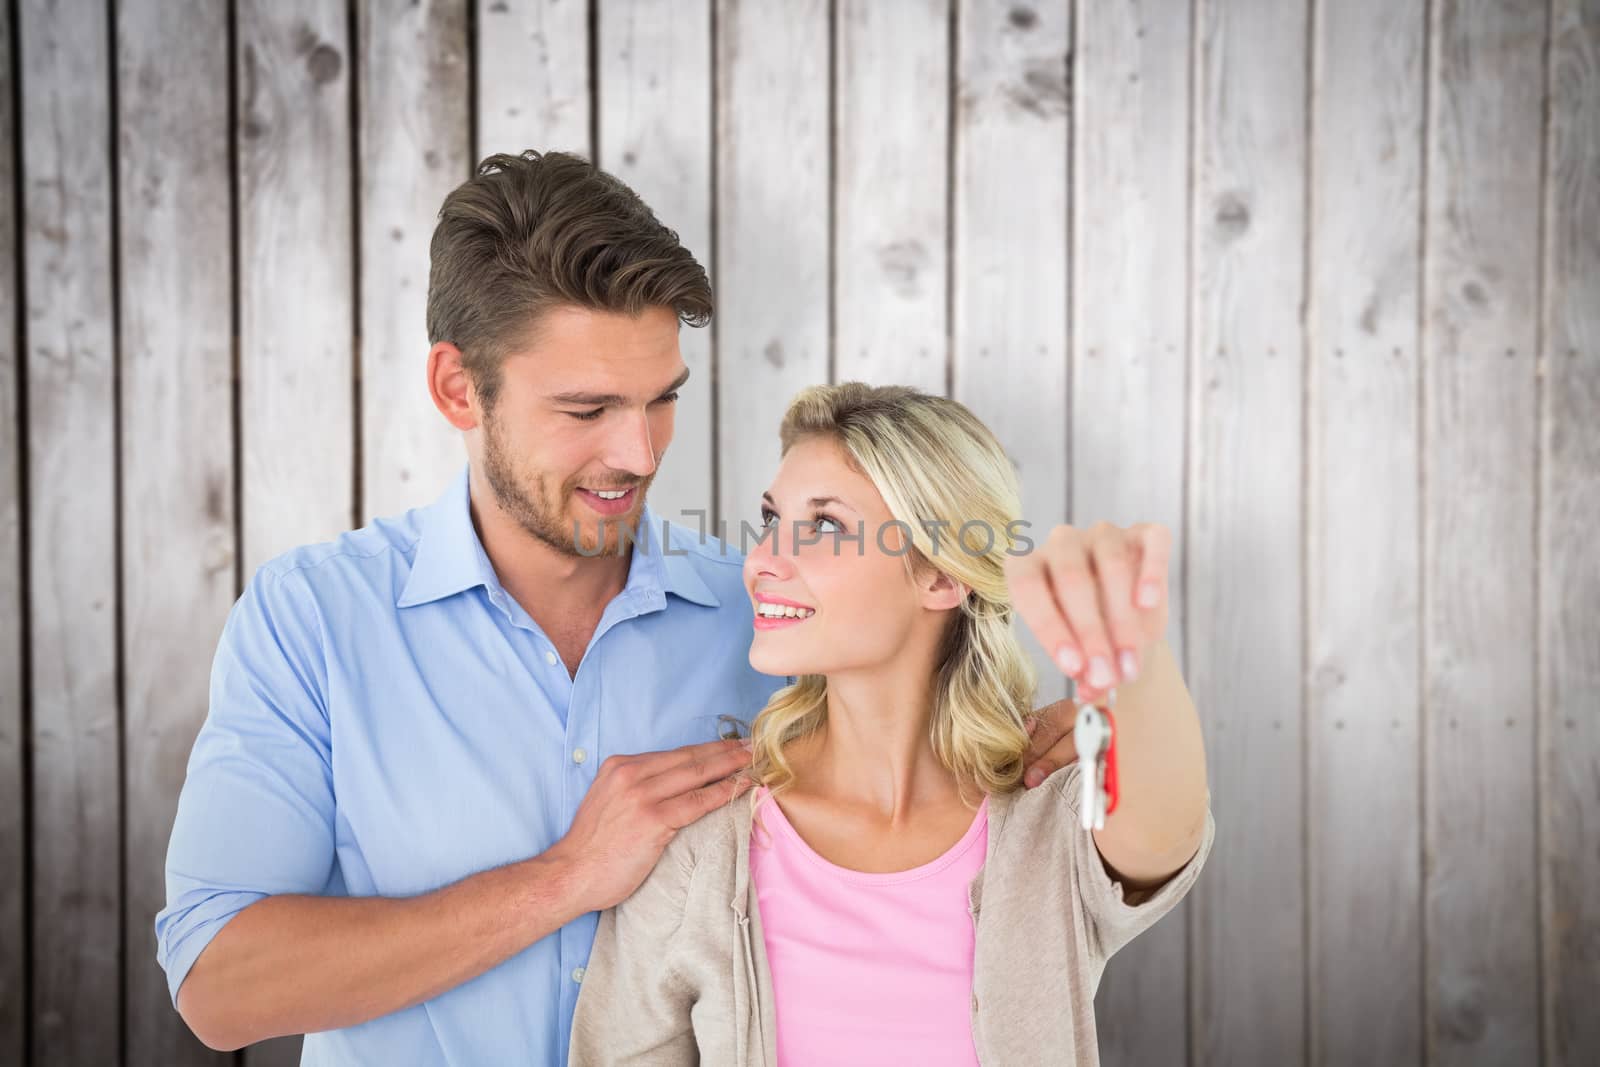 Attractive young couple showing new house key against wooden planks